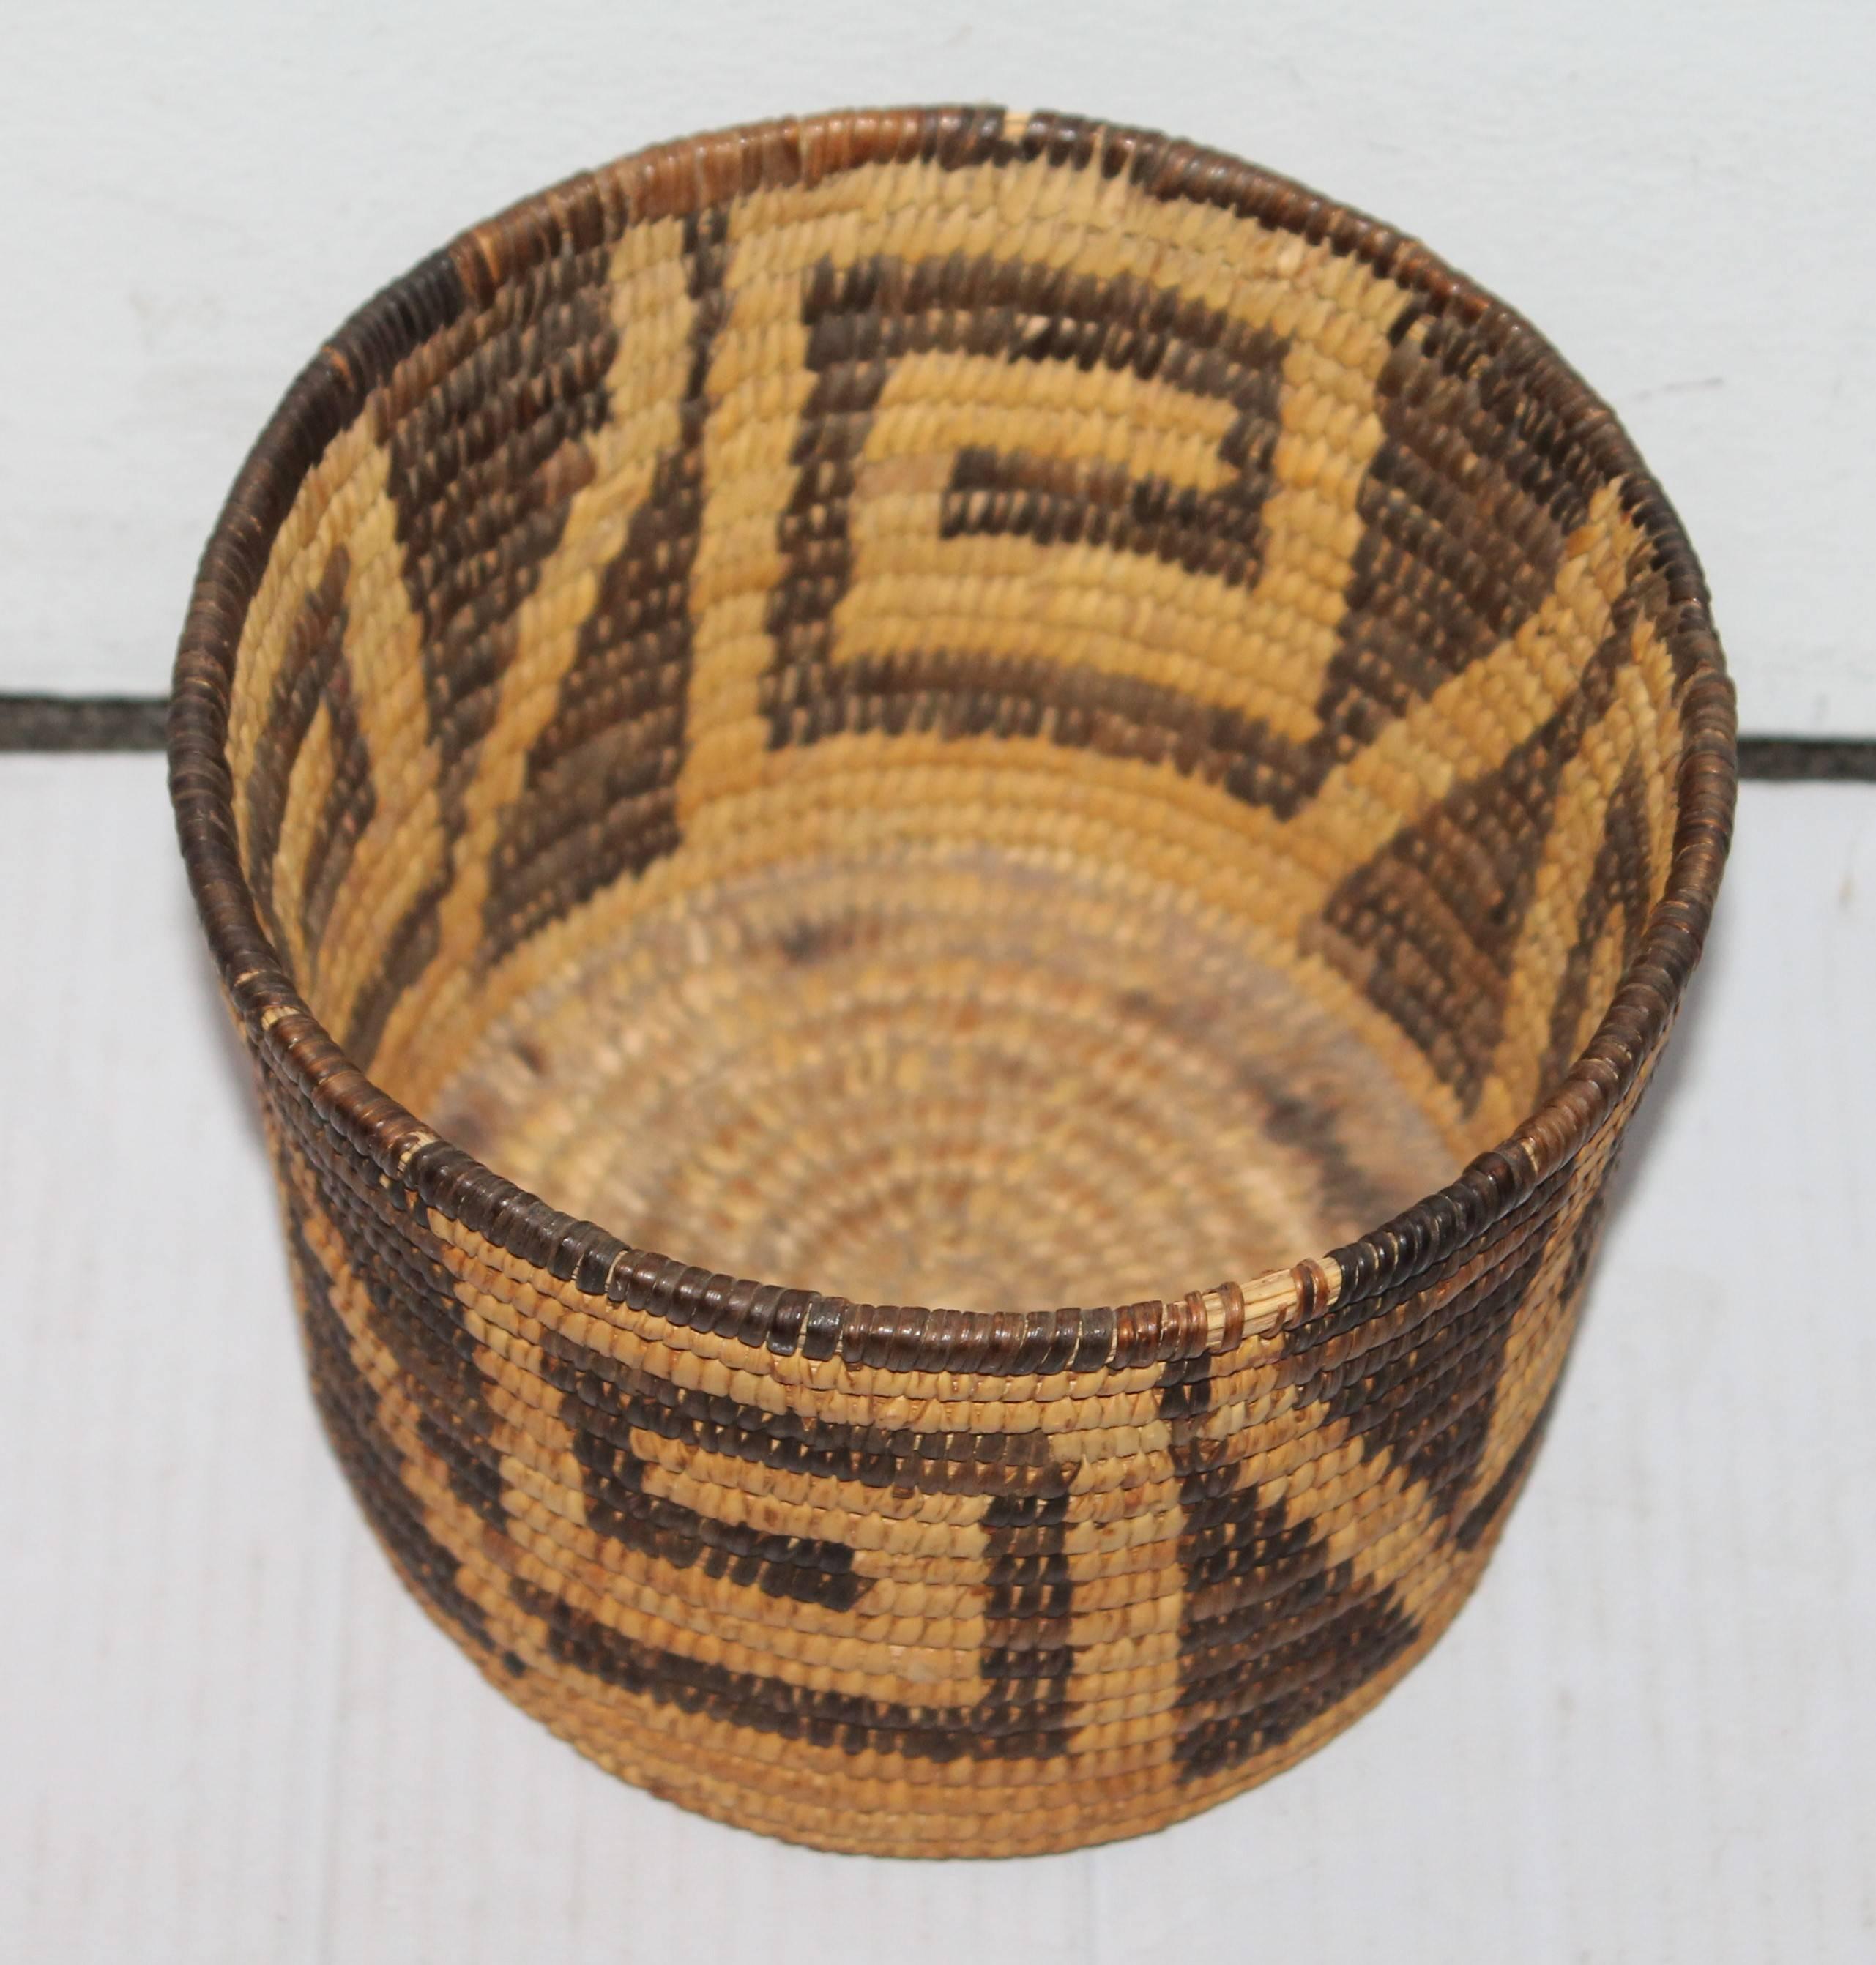 This very interesting geometric Papago Indian basket is in nice condition with a very deep dark coloration in the coils. The size is a great addition to any basket collection.